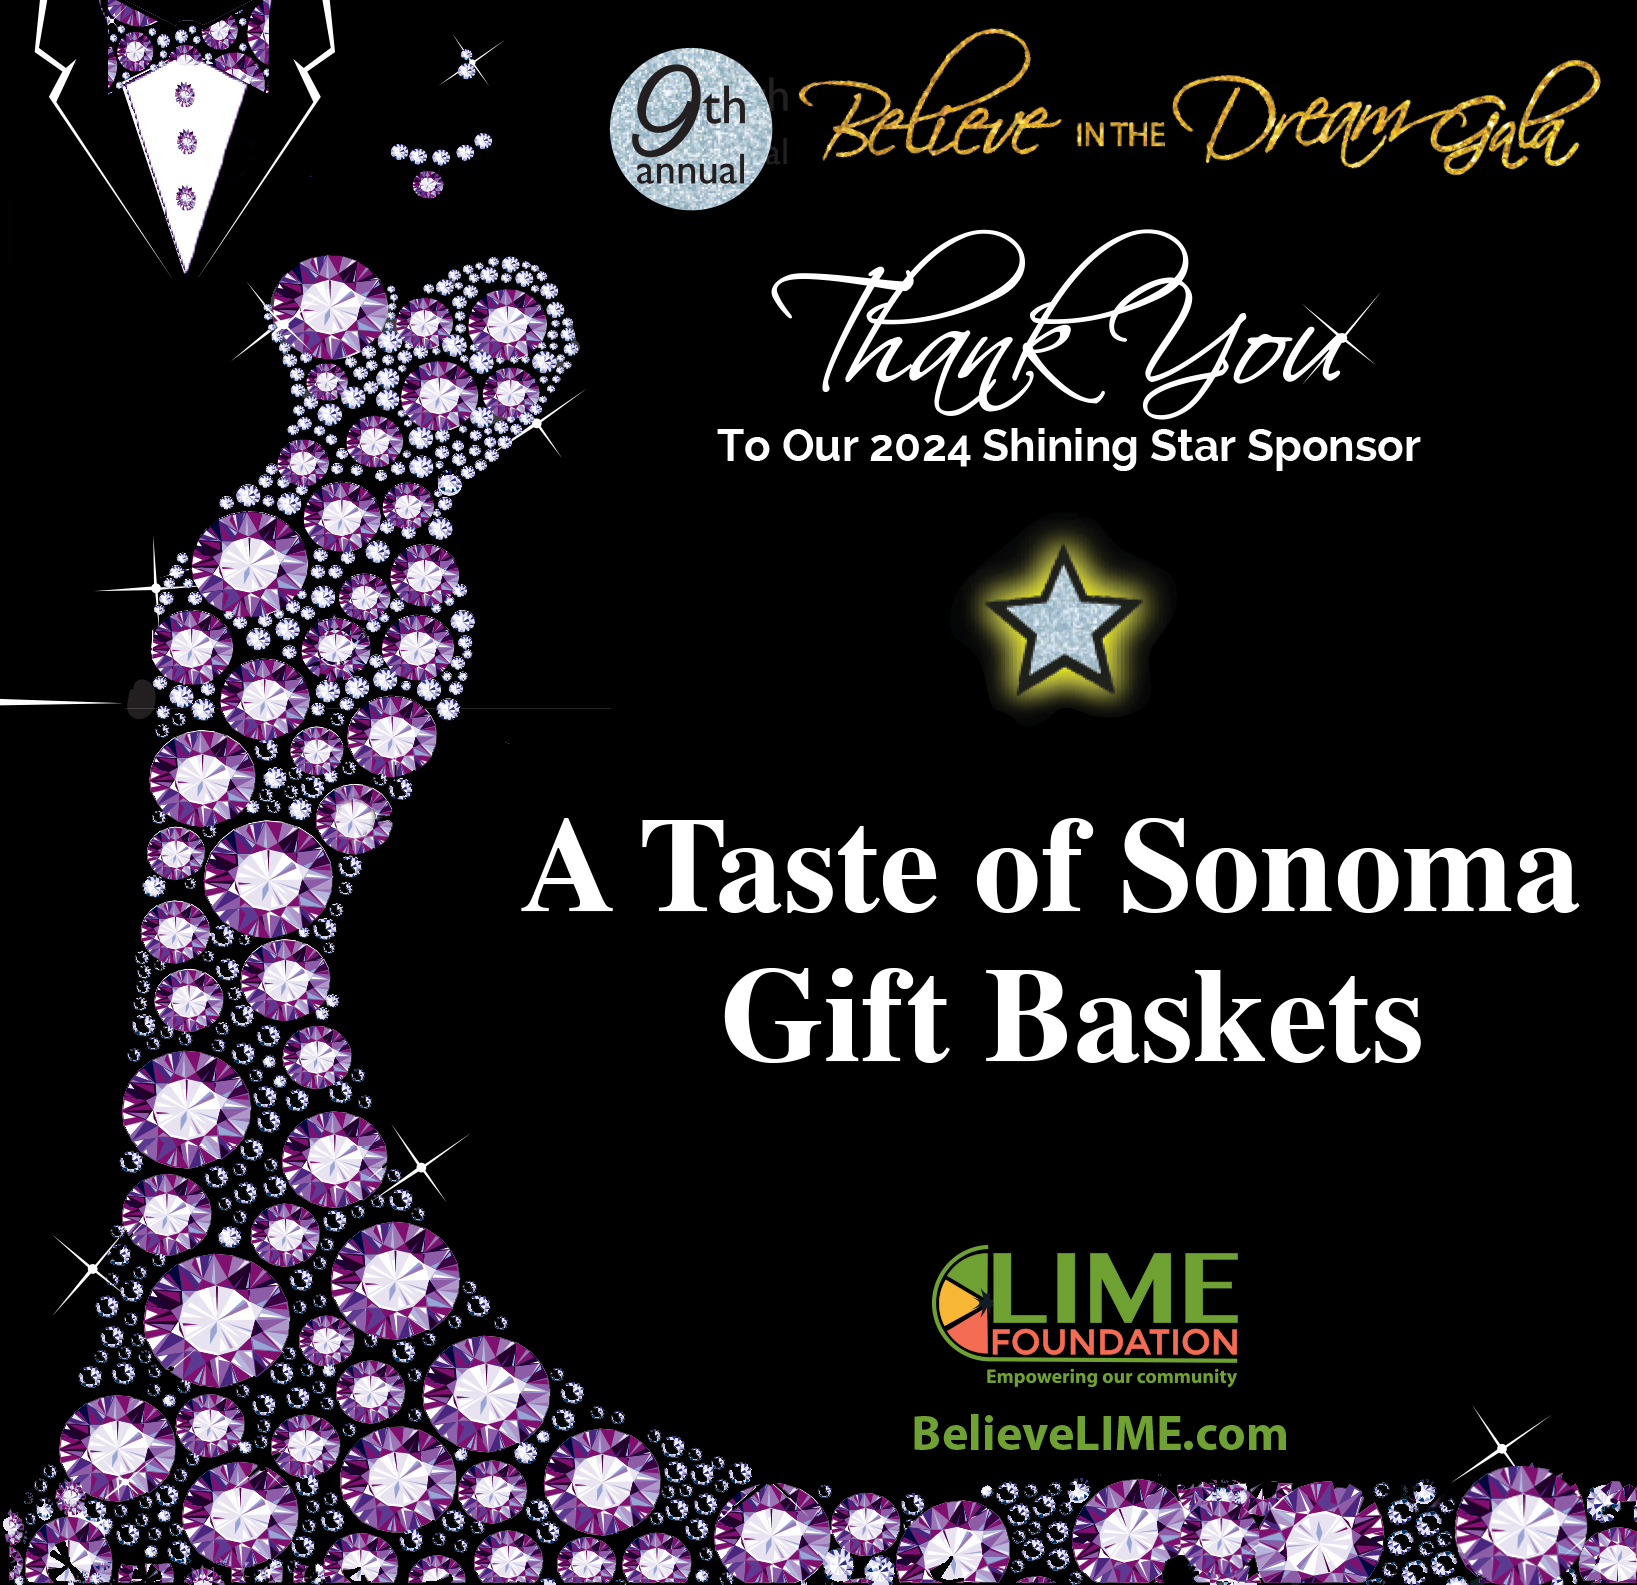 Graphic thanking "a taste of sonoma gift baskets" featuring sparkling stylized wine bottle design for the 9th annual Believe The Dream 2024 gala by lime foundation.